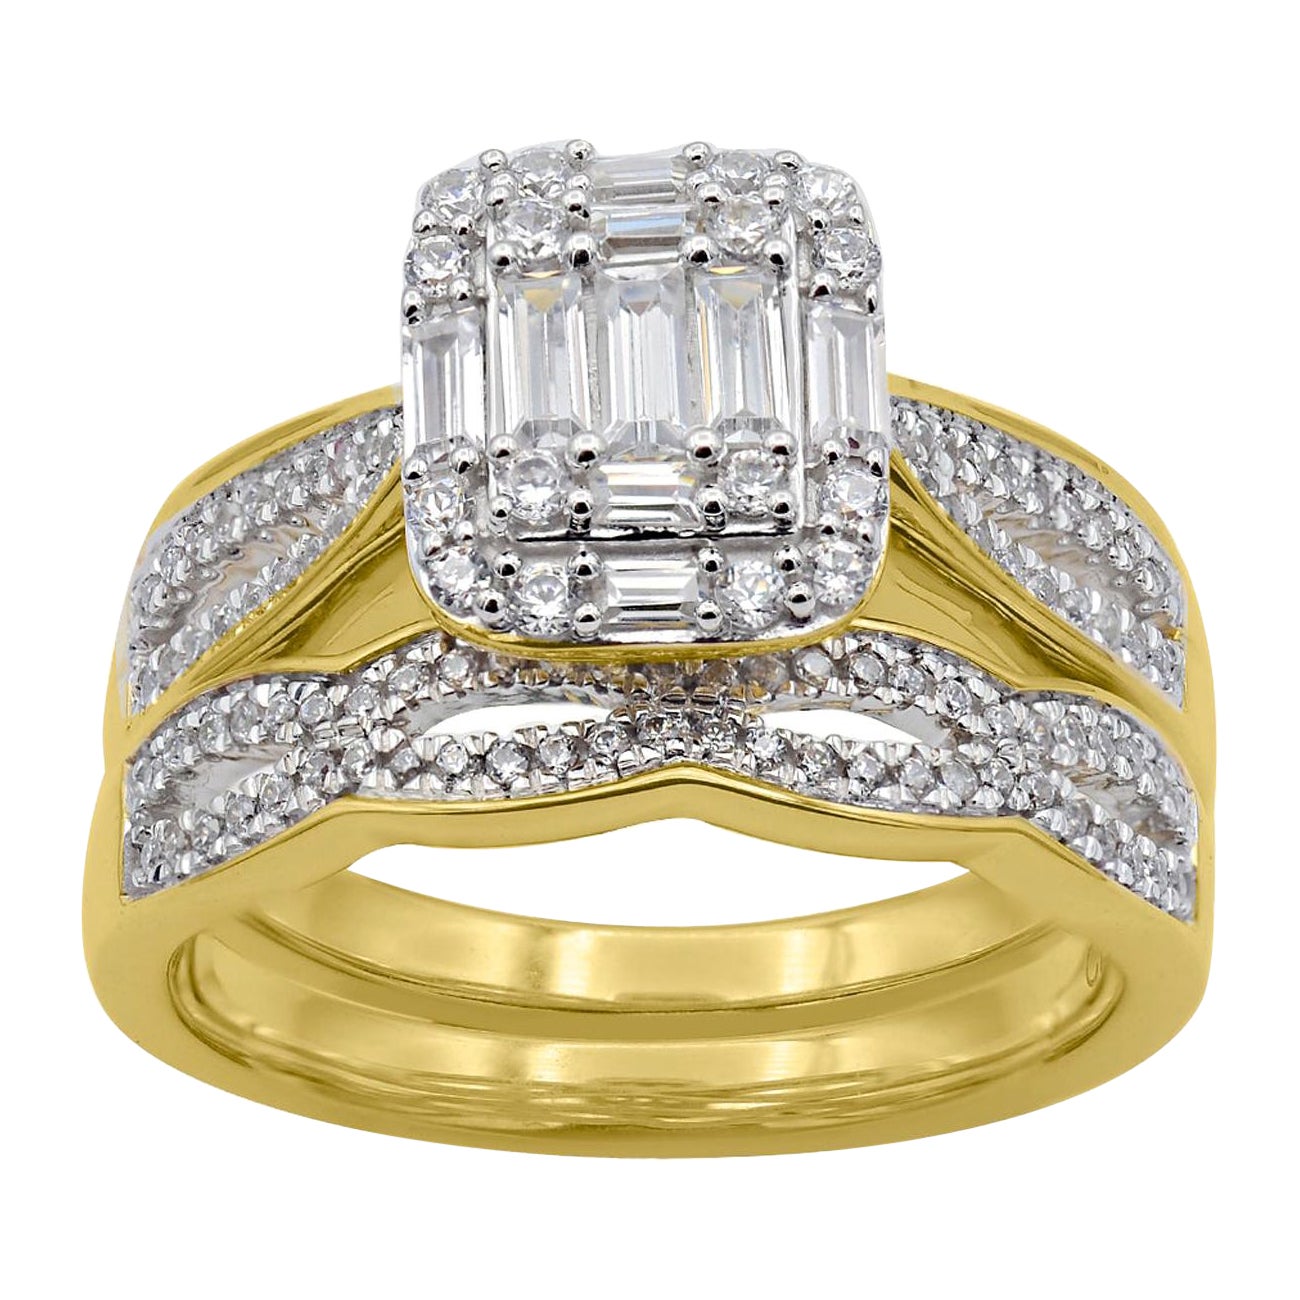 TJD 3/4 Carat Round & Baguette Diamond 14K Yellow Gold Stackable Bridal Set Ring For Sale